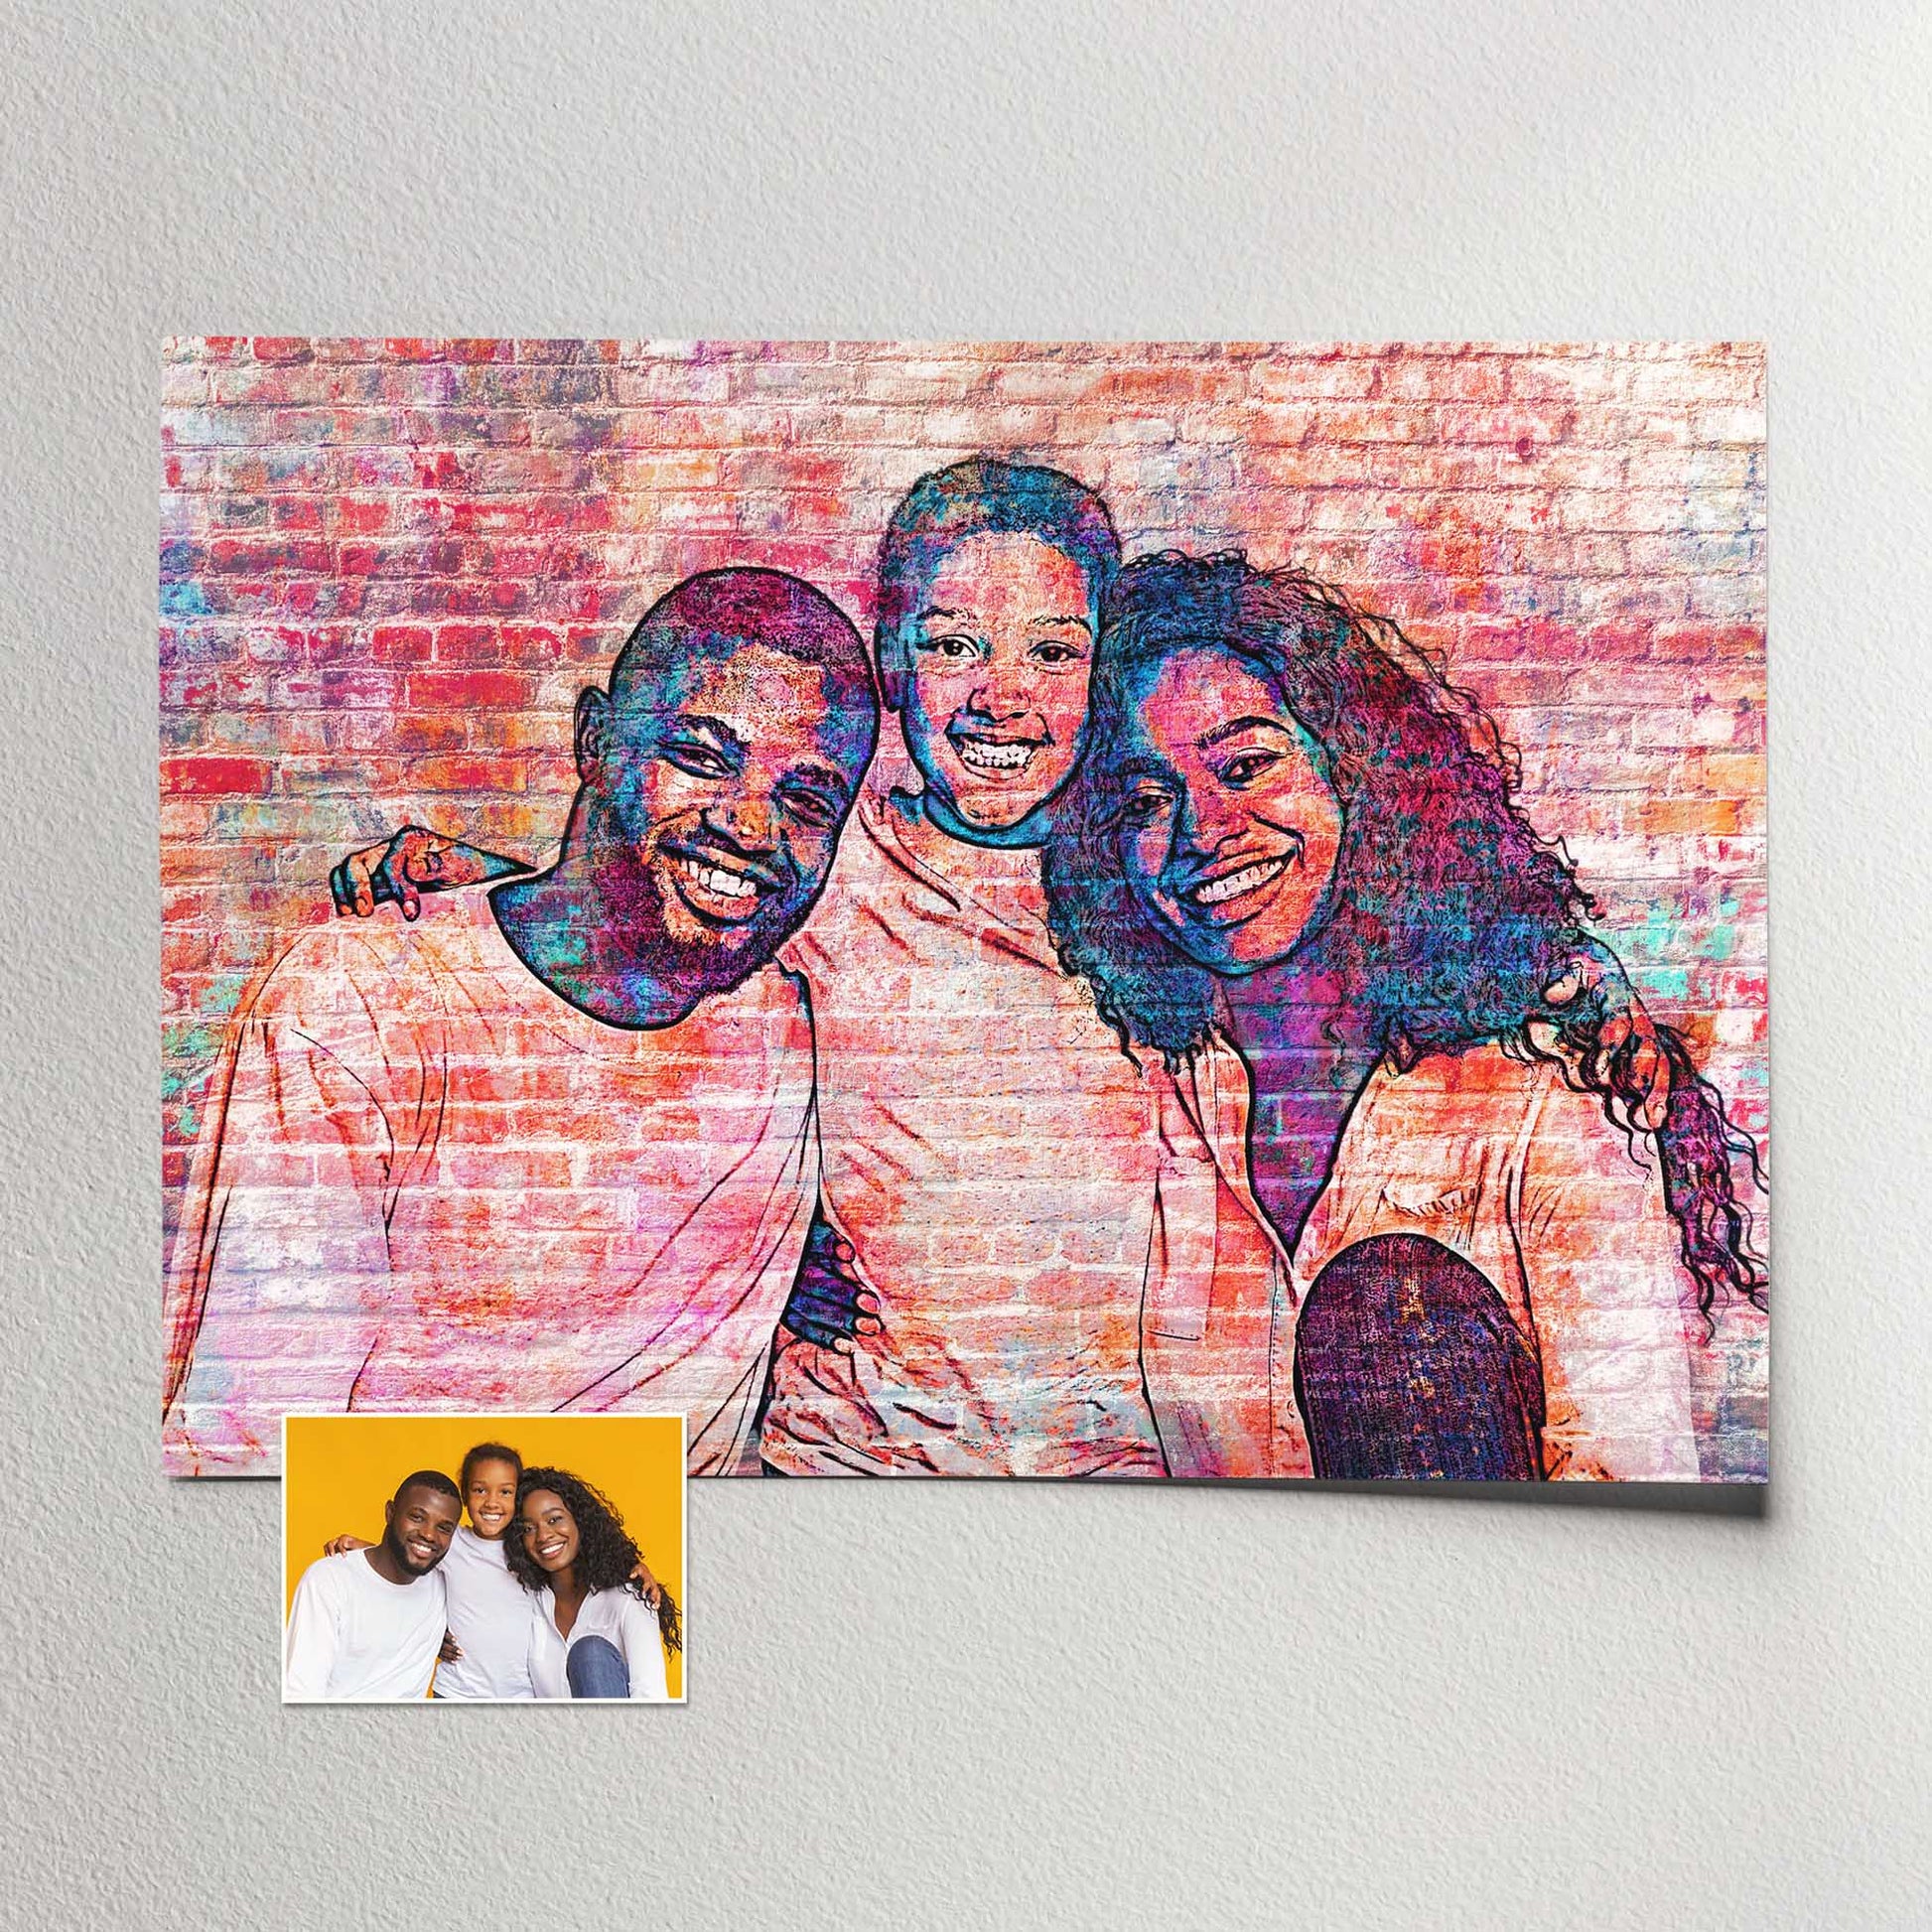 Authentic Urban Vibes: Immerse yourself in the urban street art culture with this personalised brick graffiti street art print. The realistic filter effect adds an authentic touch, while the bold and daring design stimulates the imagination